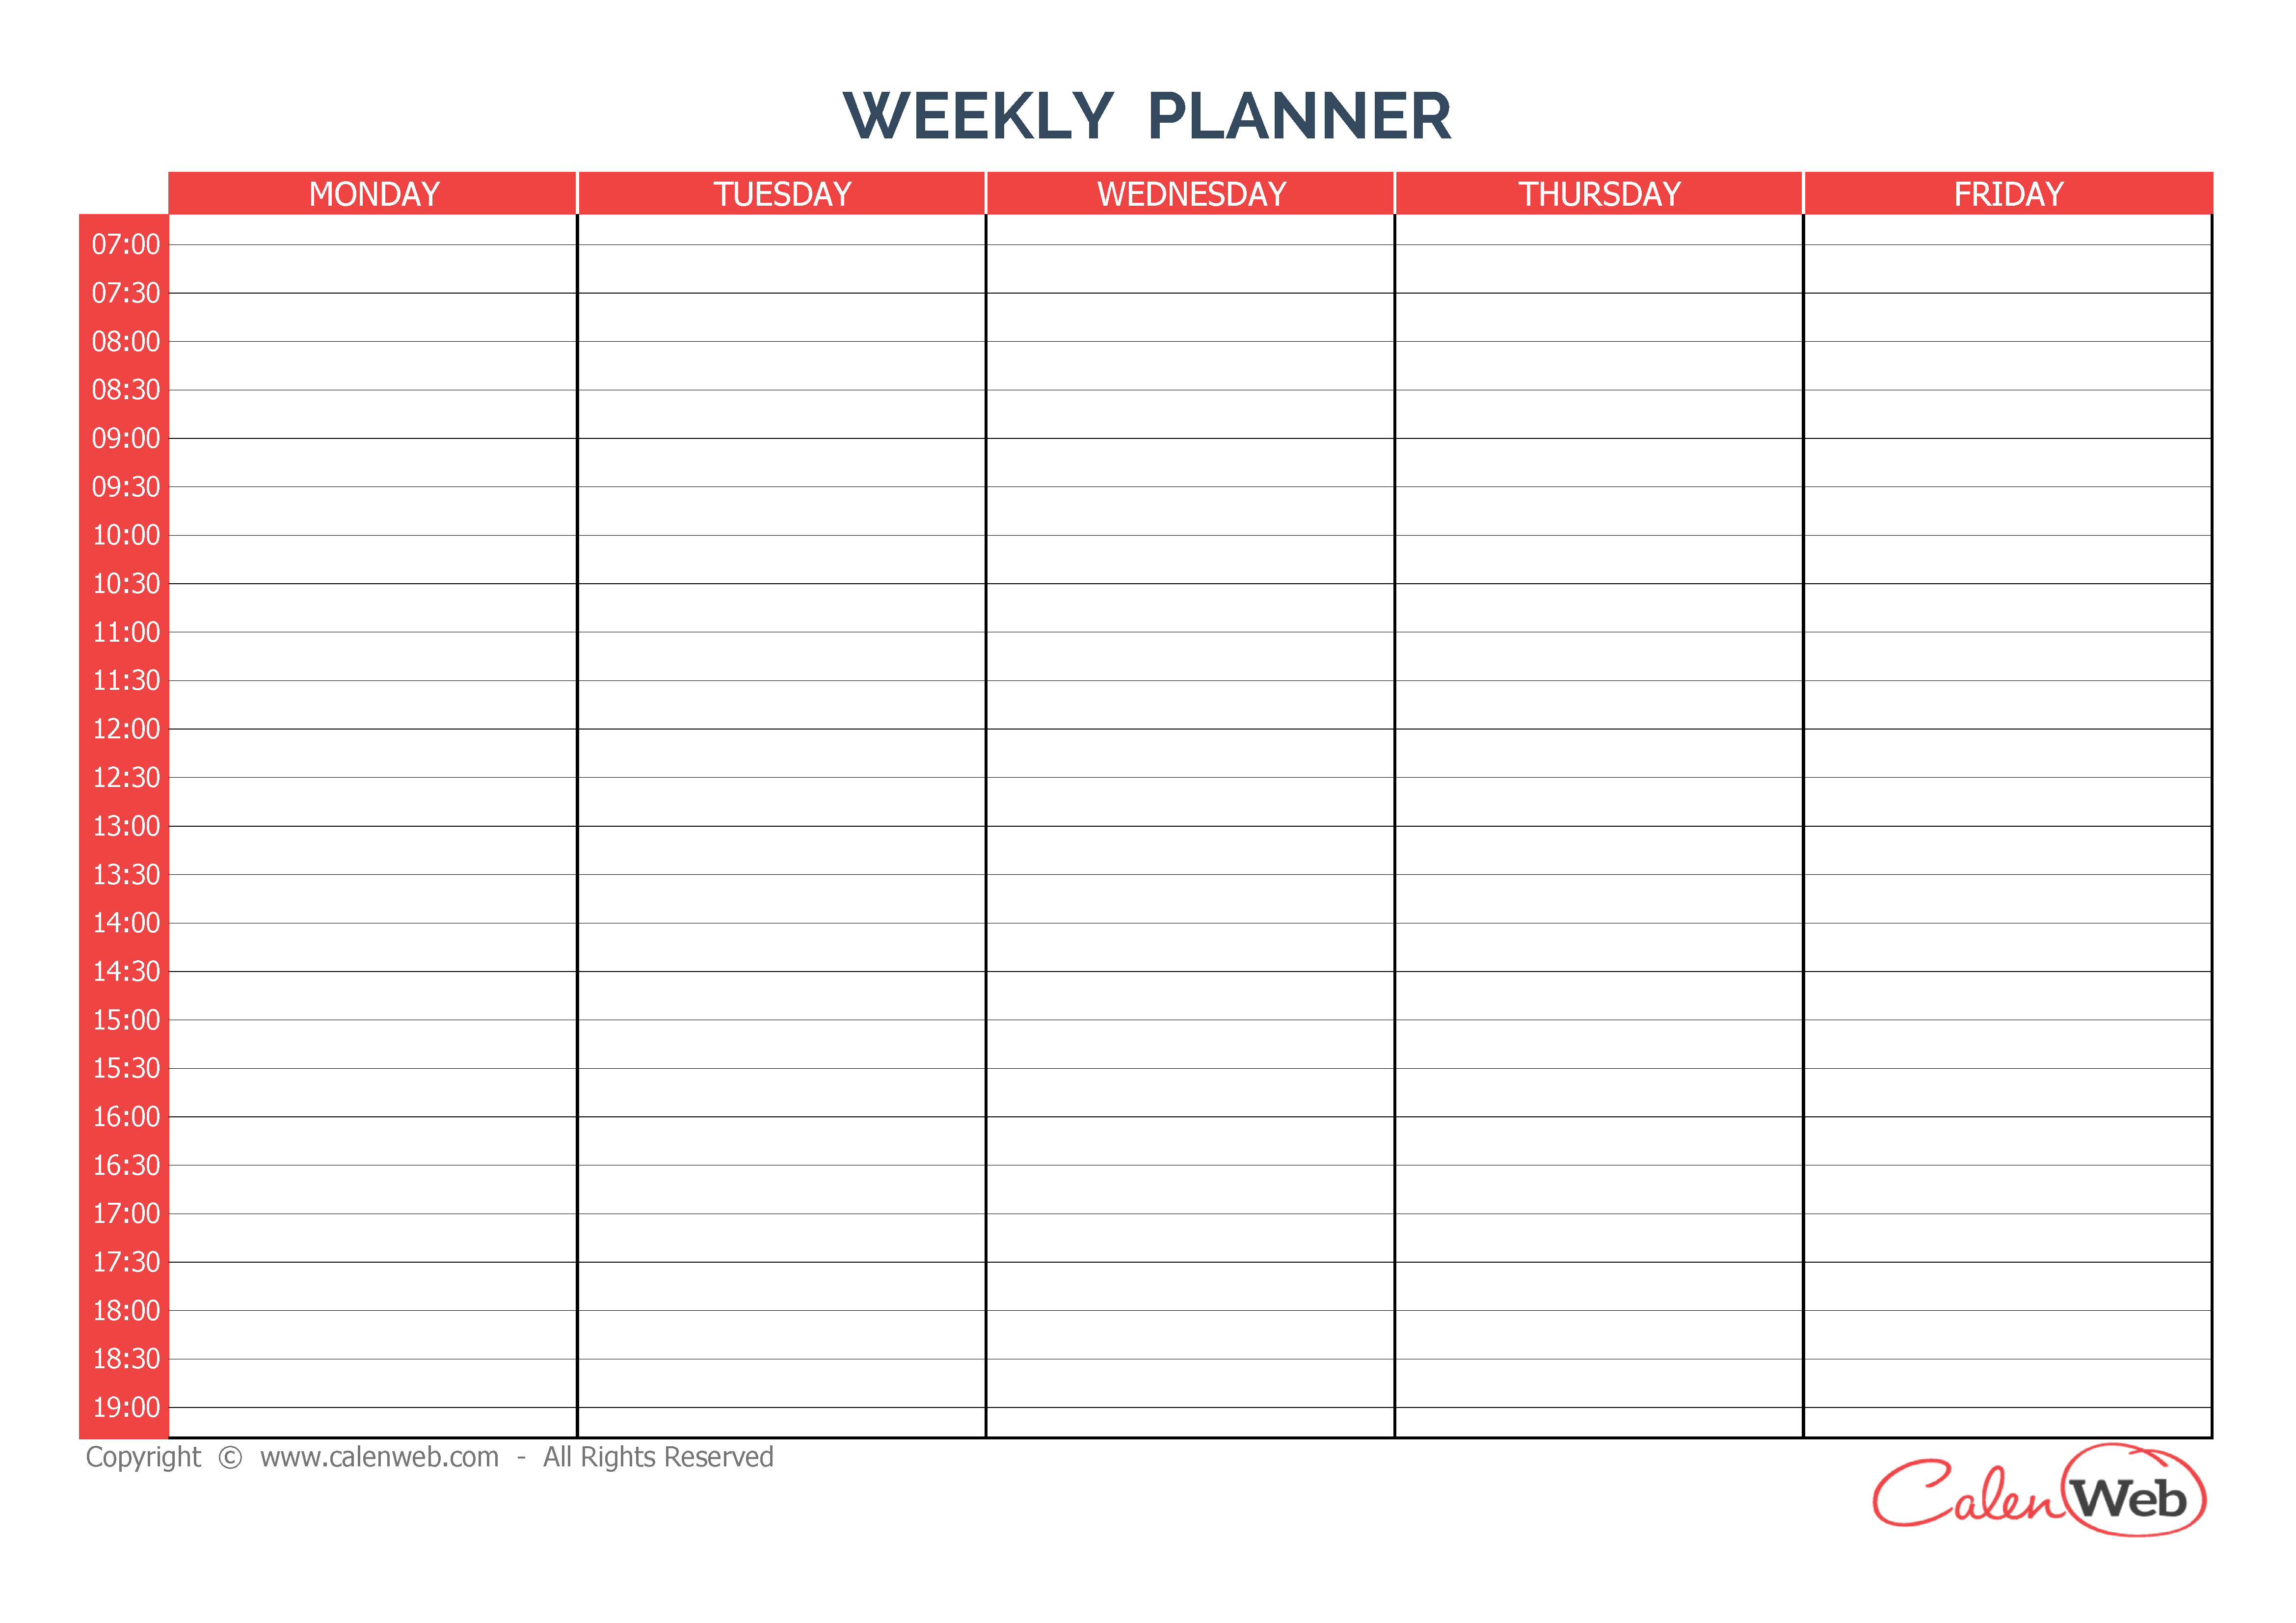 Weekly Planner 5 Days A Week Of 5 Days  Calenweb in 5 Day Weekly Planner Template